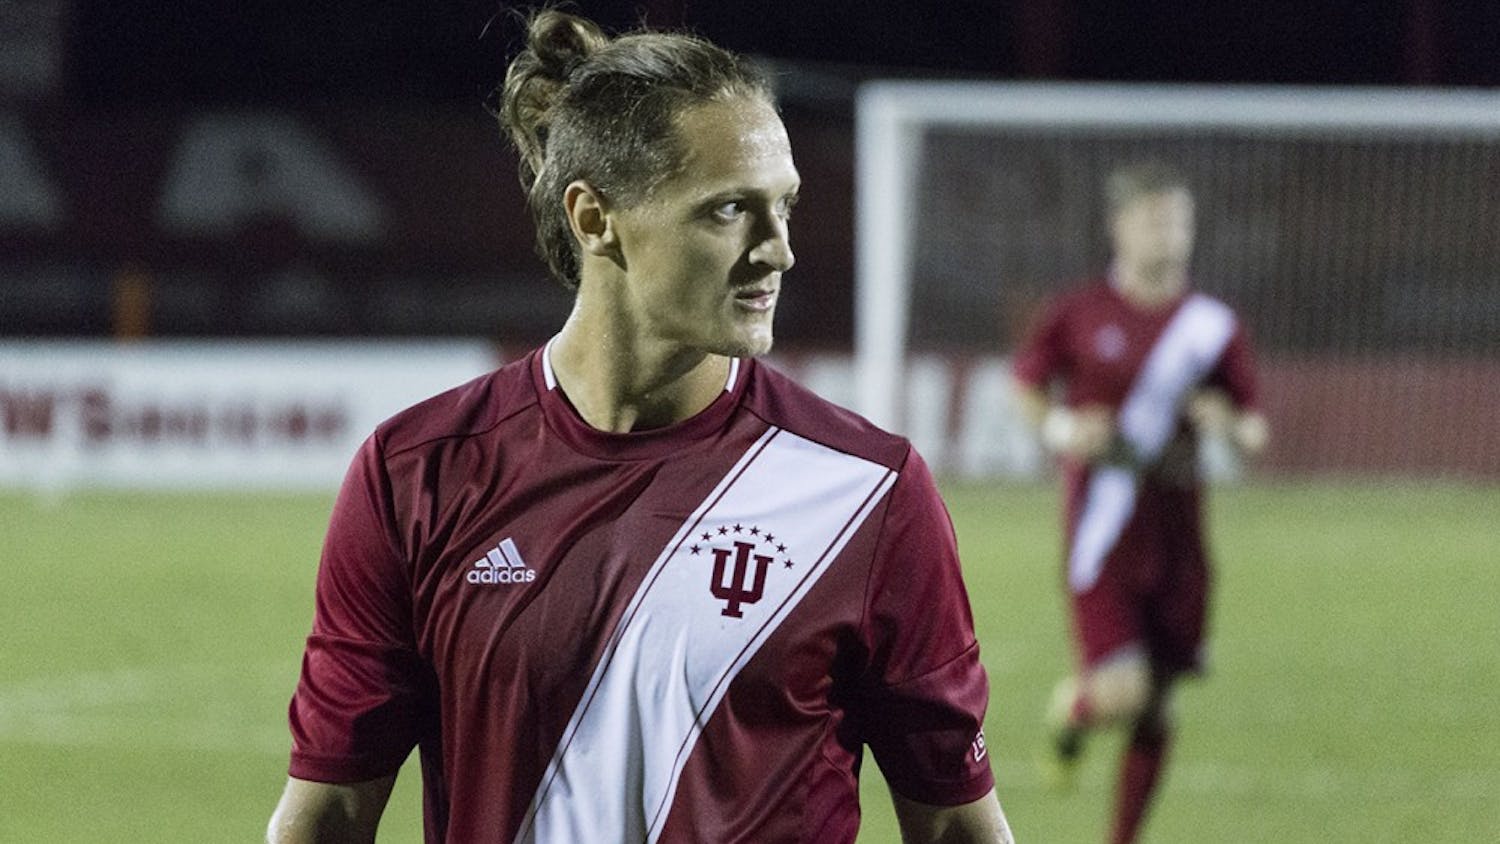 Indiana's Richard Ballard during Tuesday evening's 2-0 victory against IUPUI at Bill Armstrong Stadium.